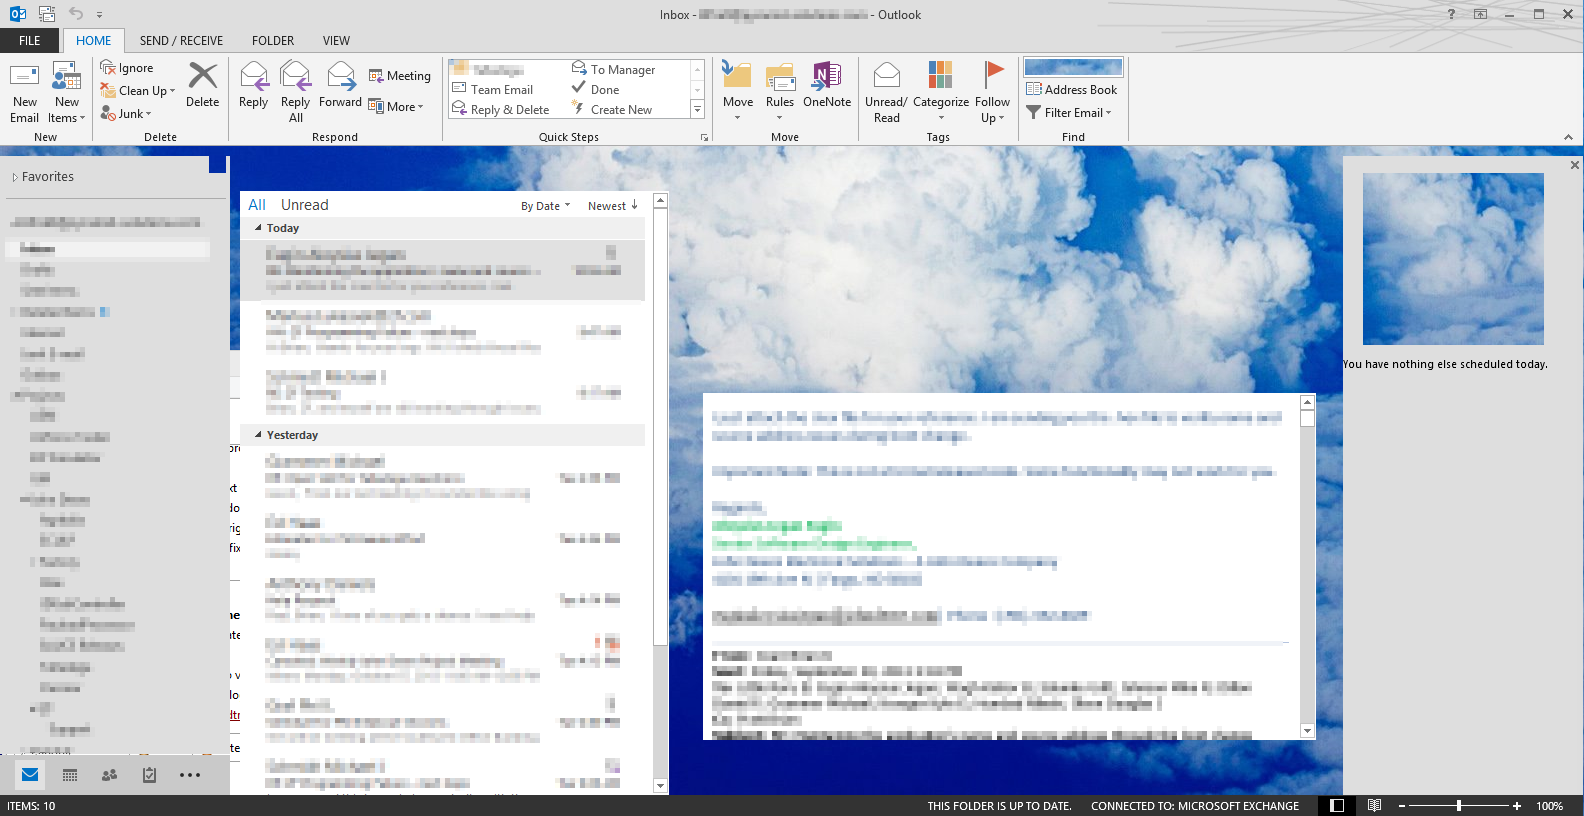 Windows Outlook Redraw Issue Super User